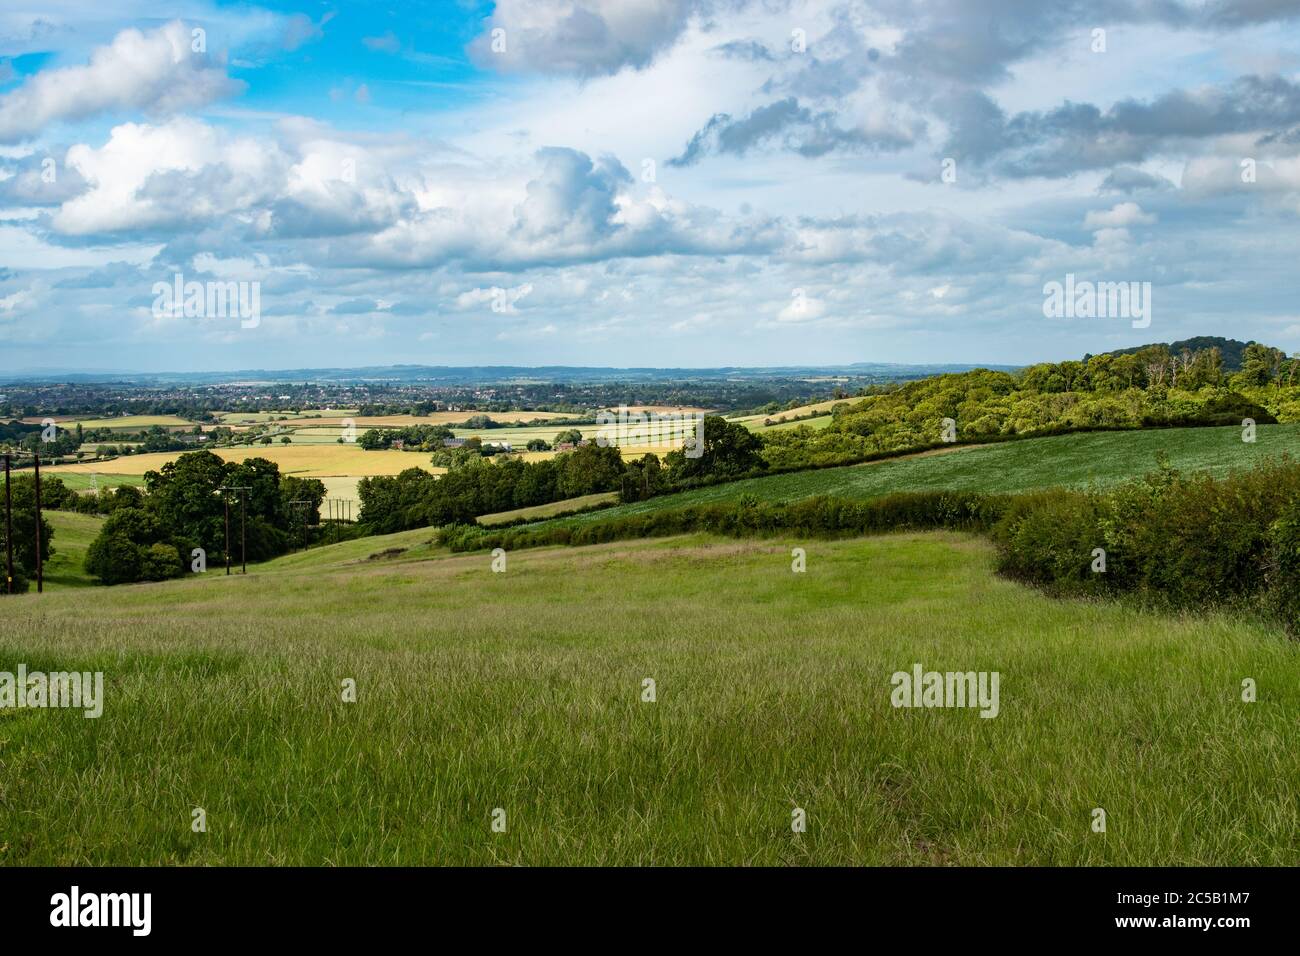 View downhill over wheat fields in Herefordshire, England on sunny day Stock Photo